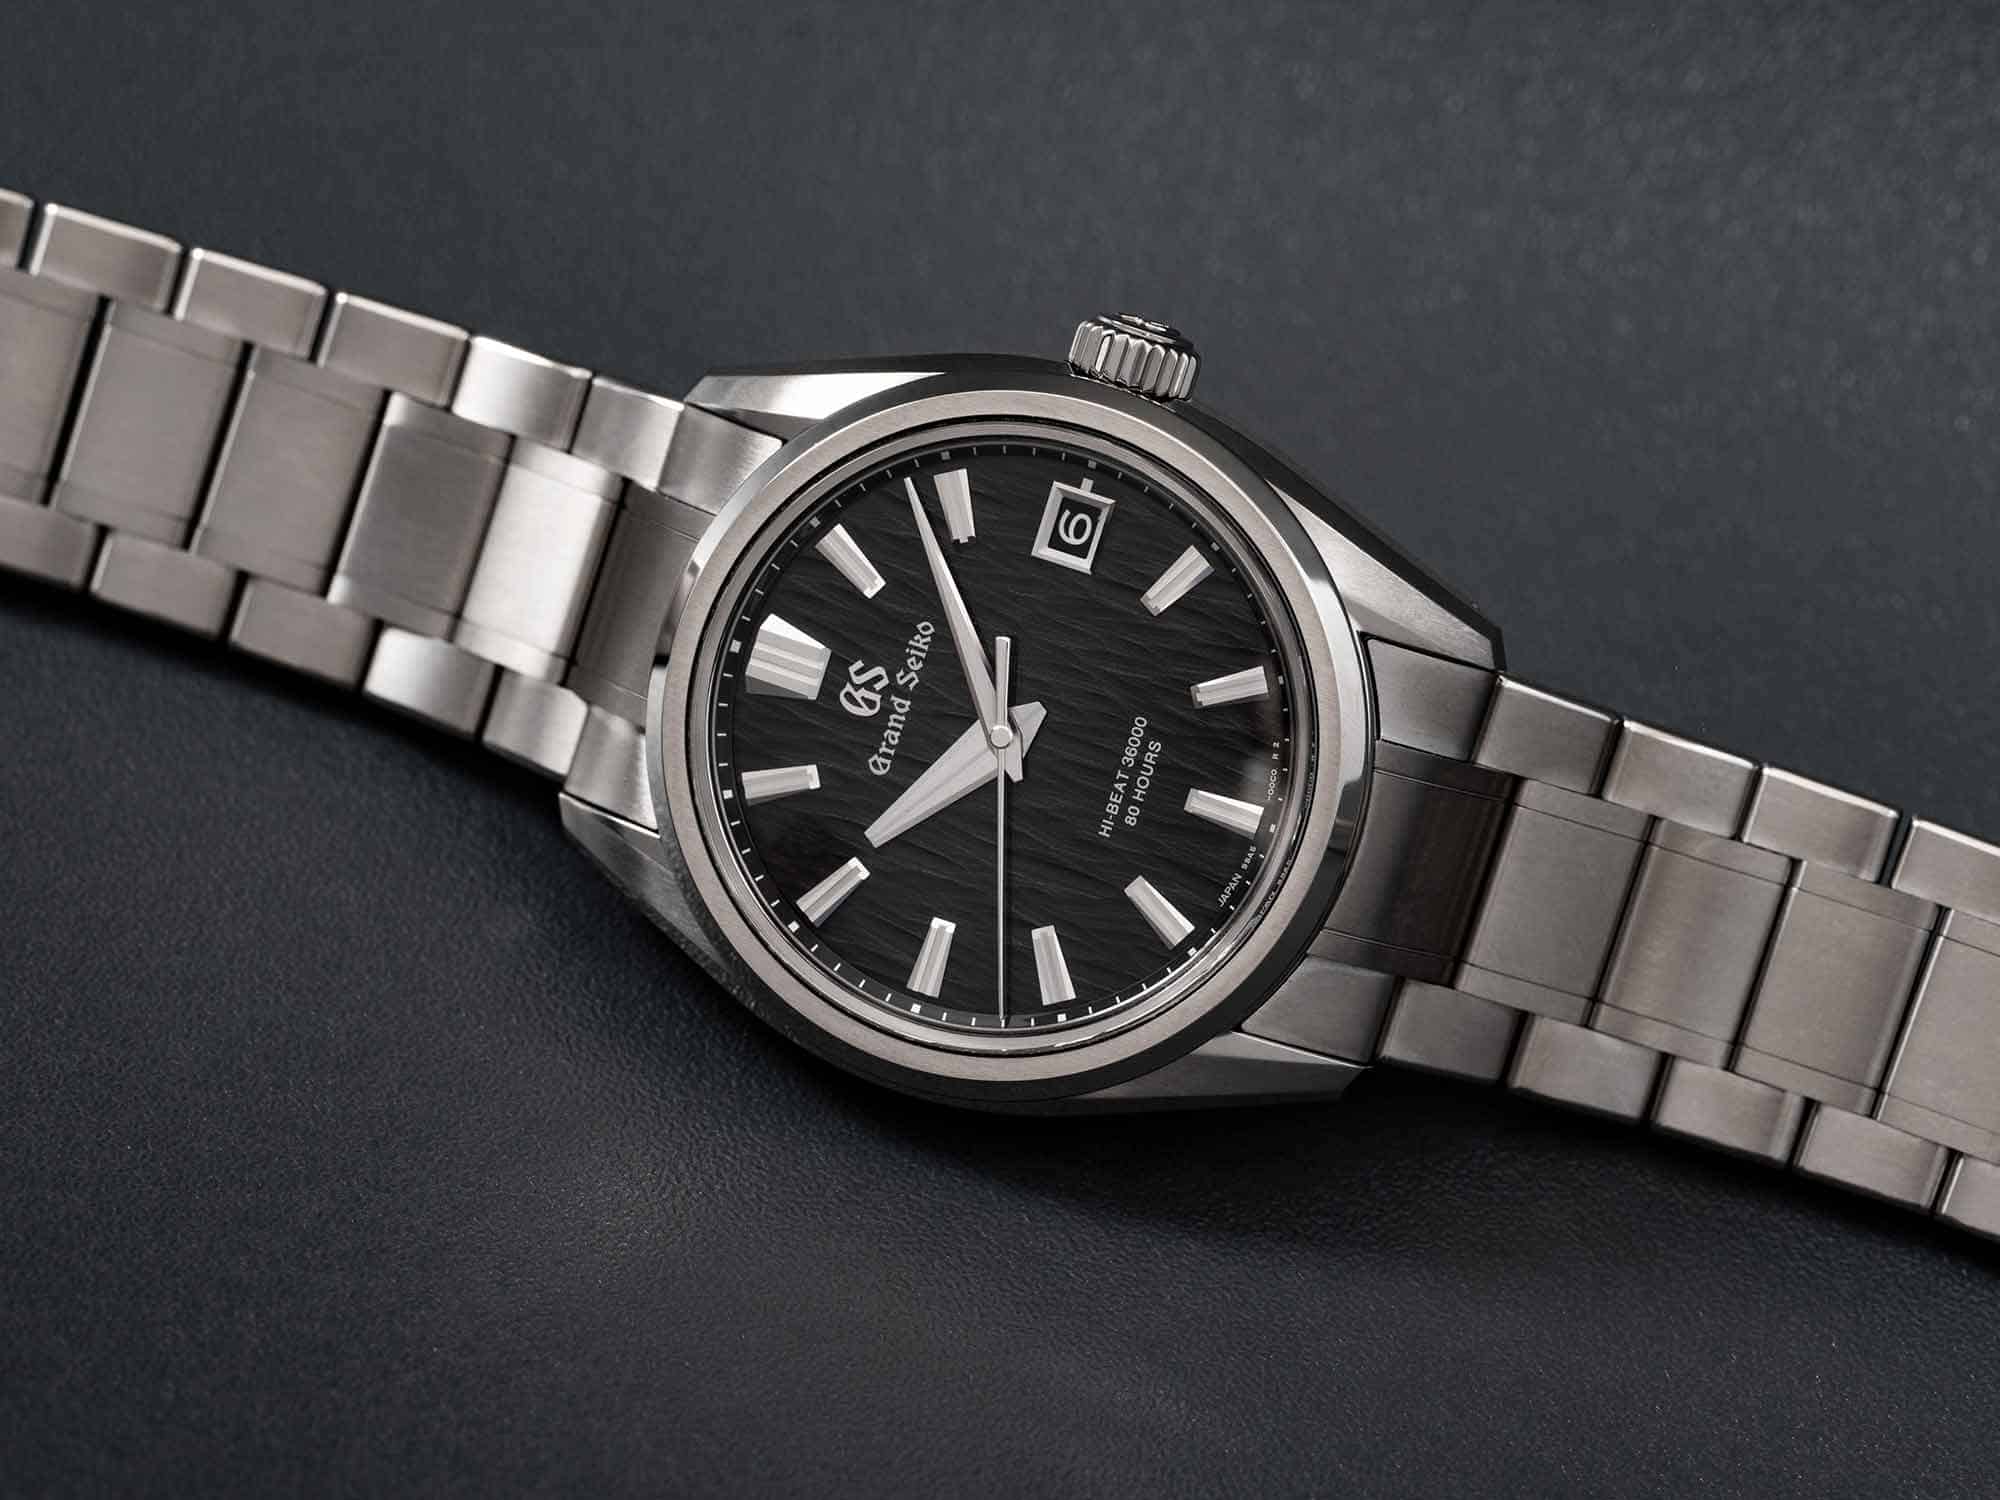 Grand Seiko Expands their Birch Offerings Once More with the SLGH017 